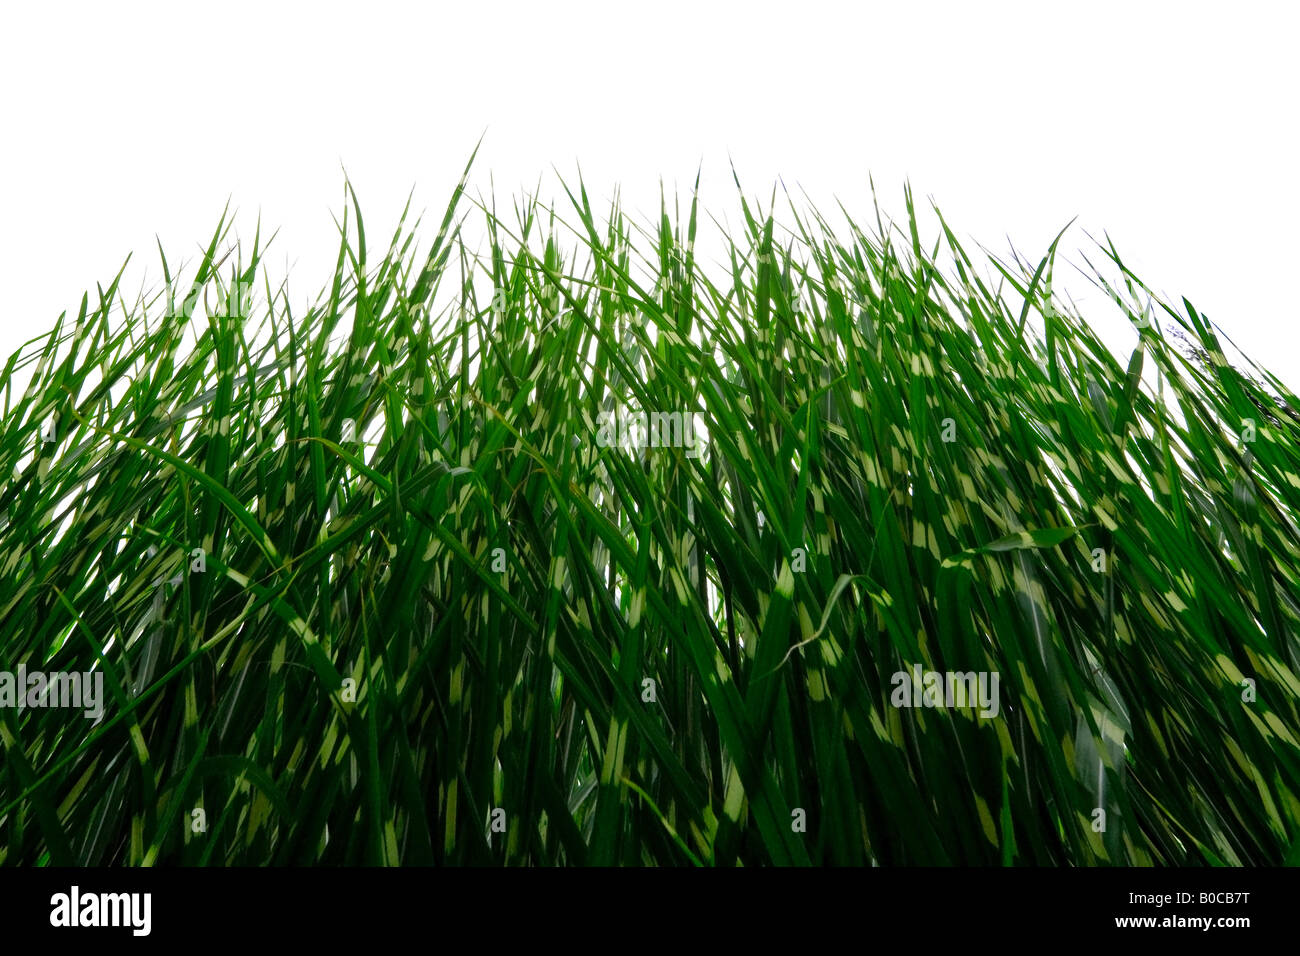 Image of green and yellow Zebra Grasses set against a white background Stock Photo